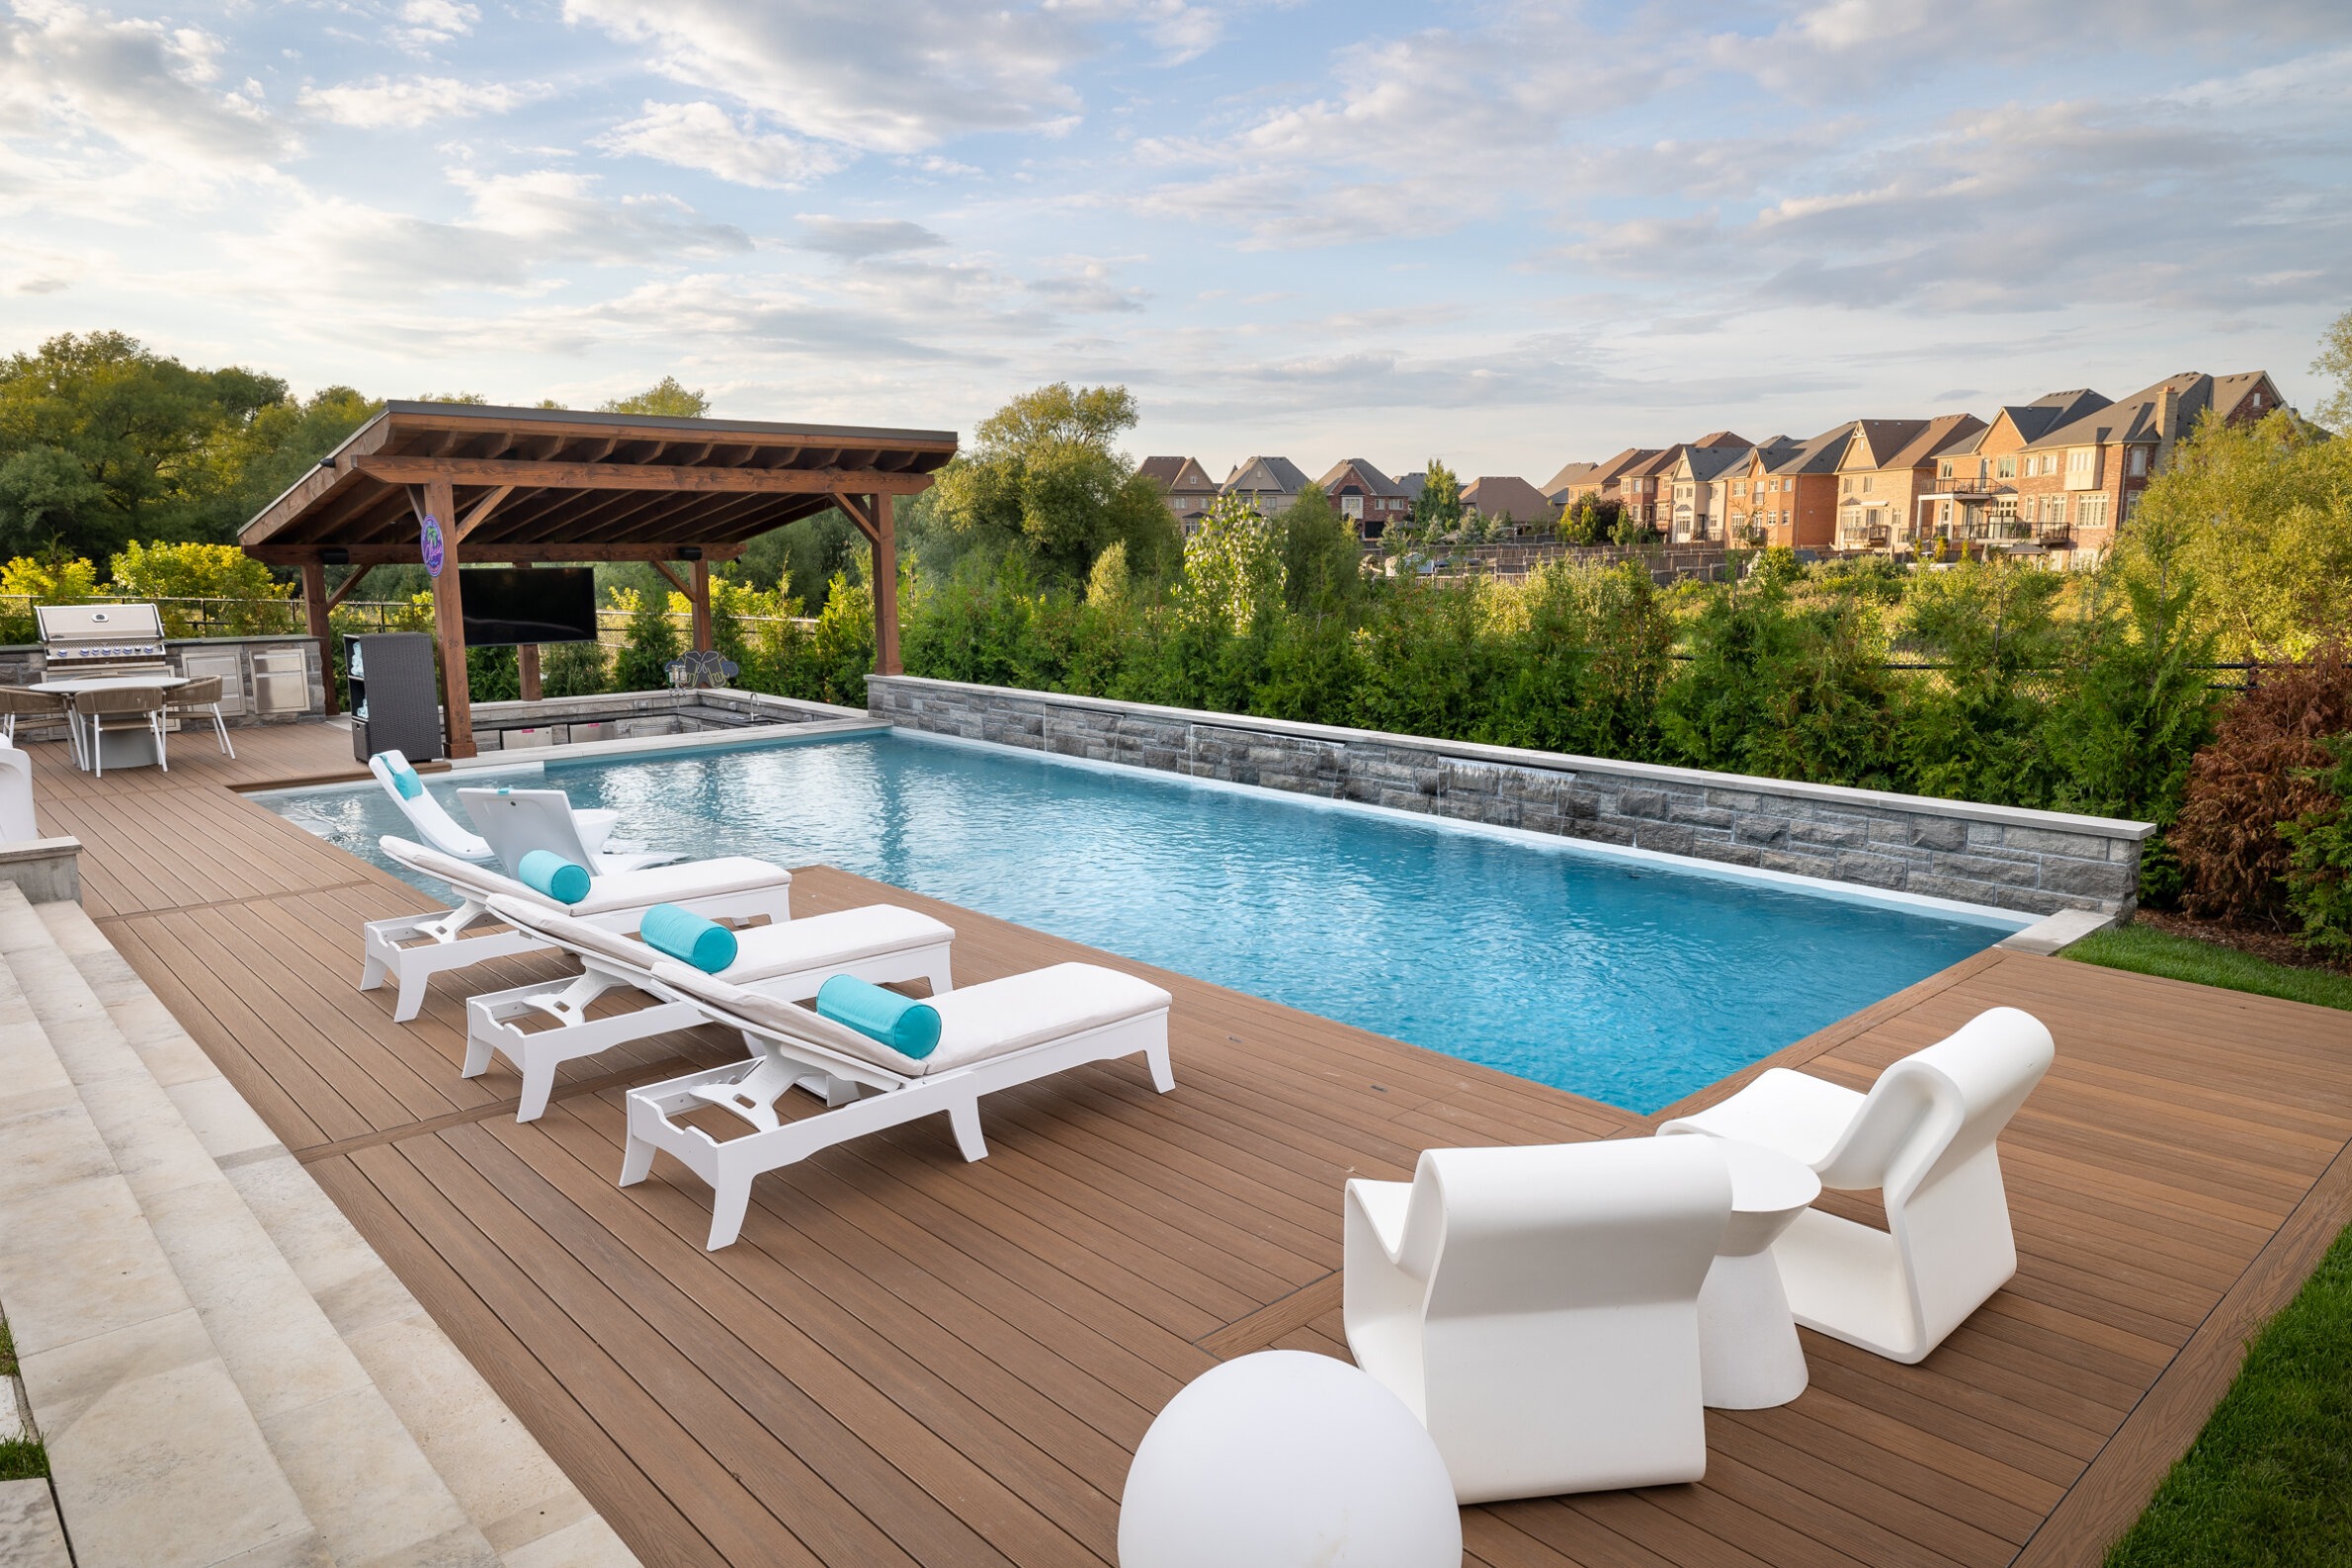 This is an outdoor residential pool area featuring lounge chairs, a pergola, and a built-in grill, with a backdrop of suburban houses and trees.